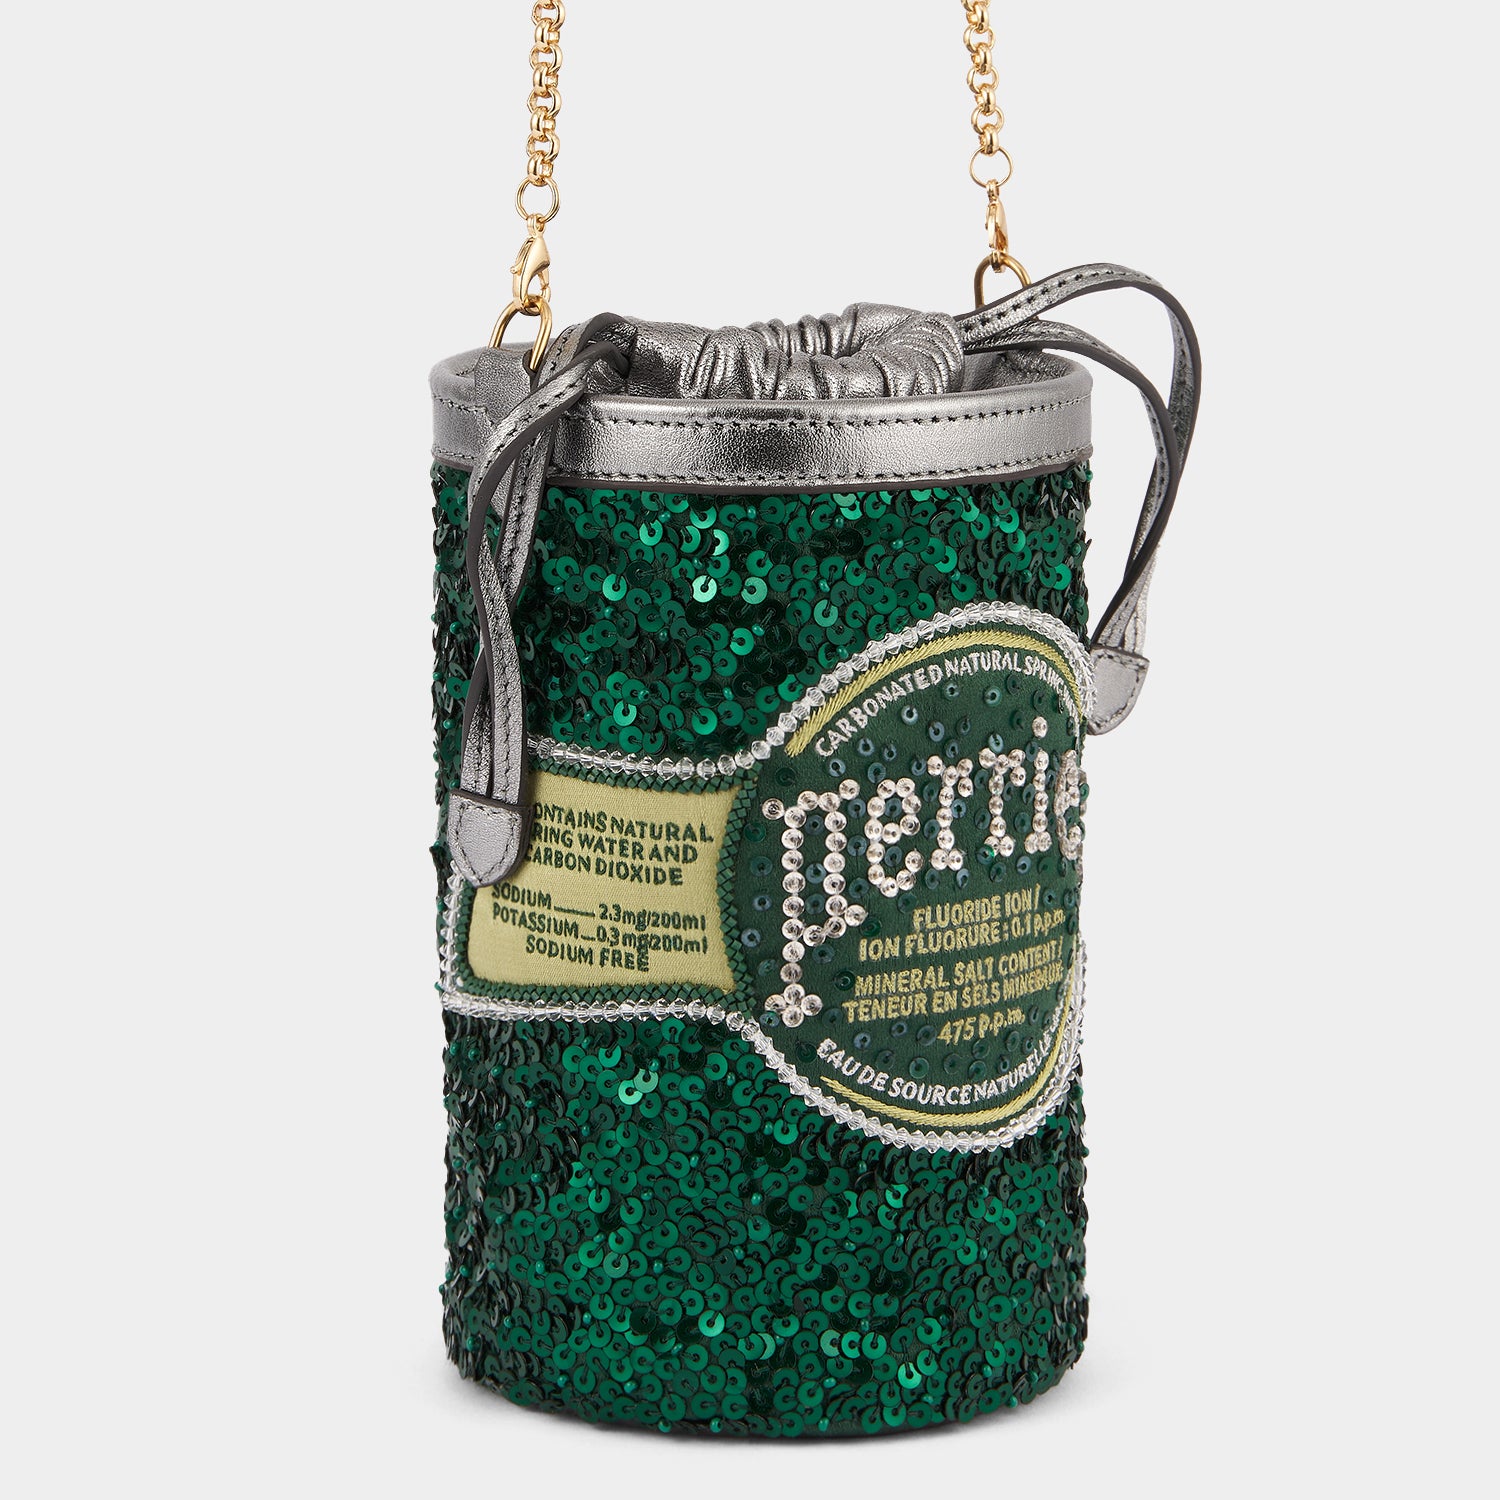 「Perrier」ミニ バケット -

                  
                    Satin in Bottle Green -
                  

                  Anya Hindmarch JP
